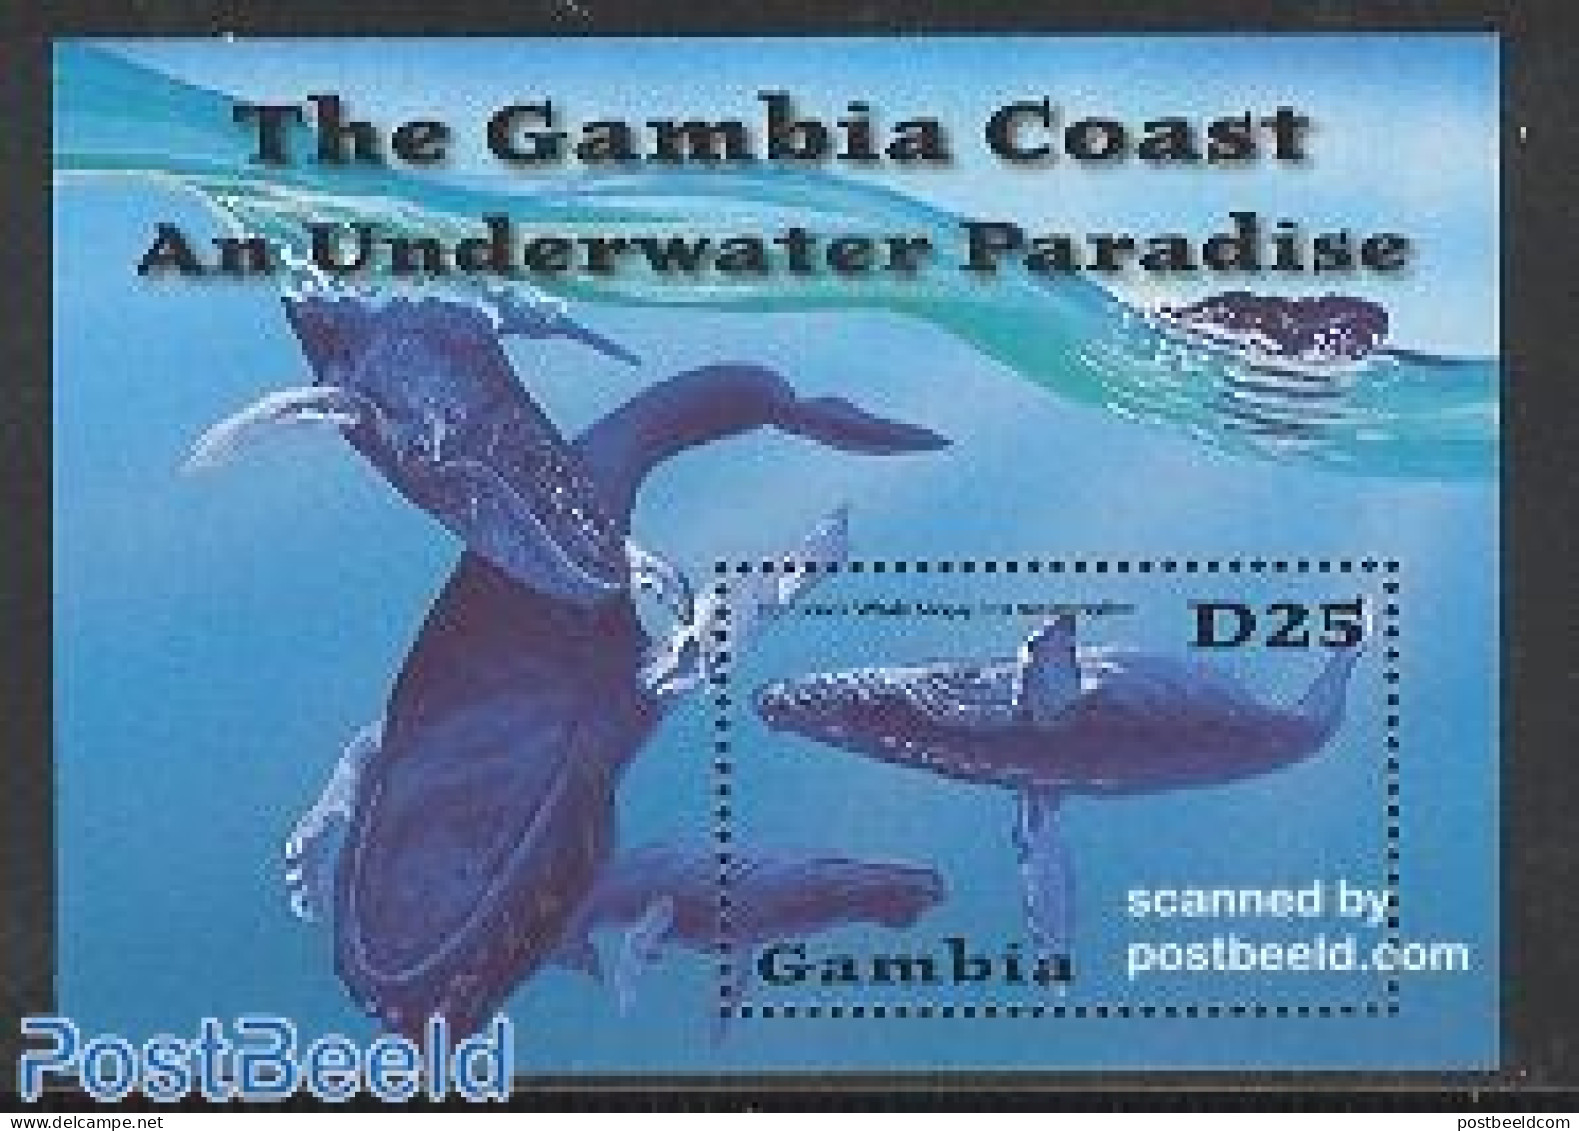 Gambia 2001 Humpback Whale S/s, Mint NH, Nature - Gambie (...-1964)